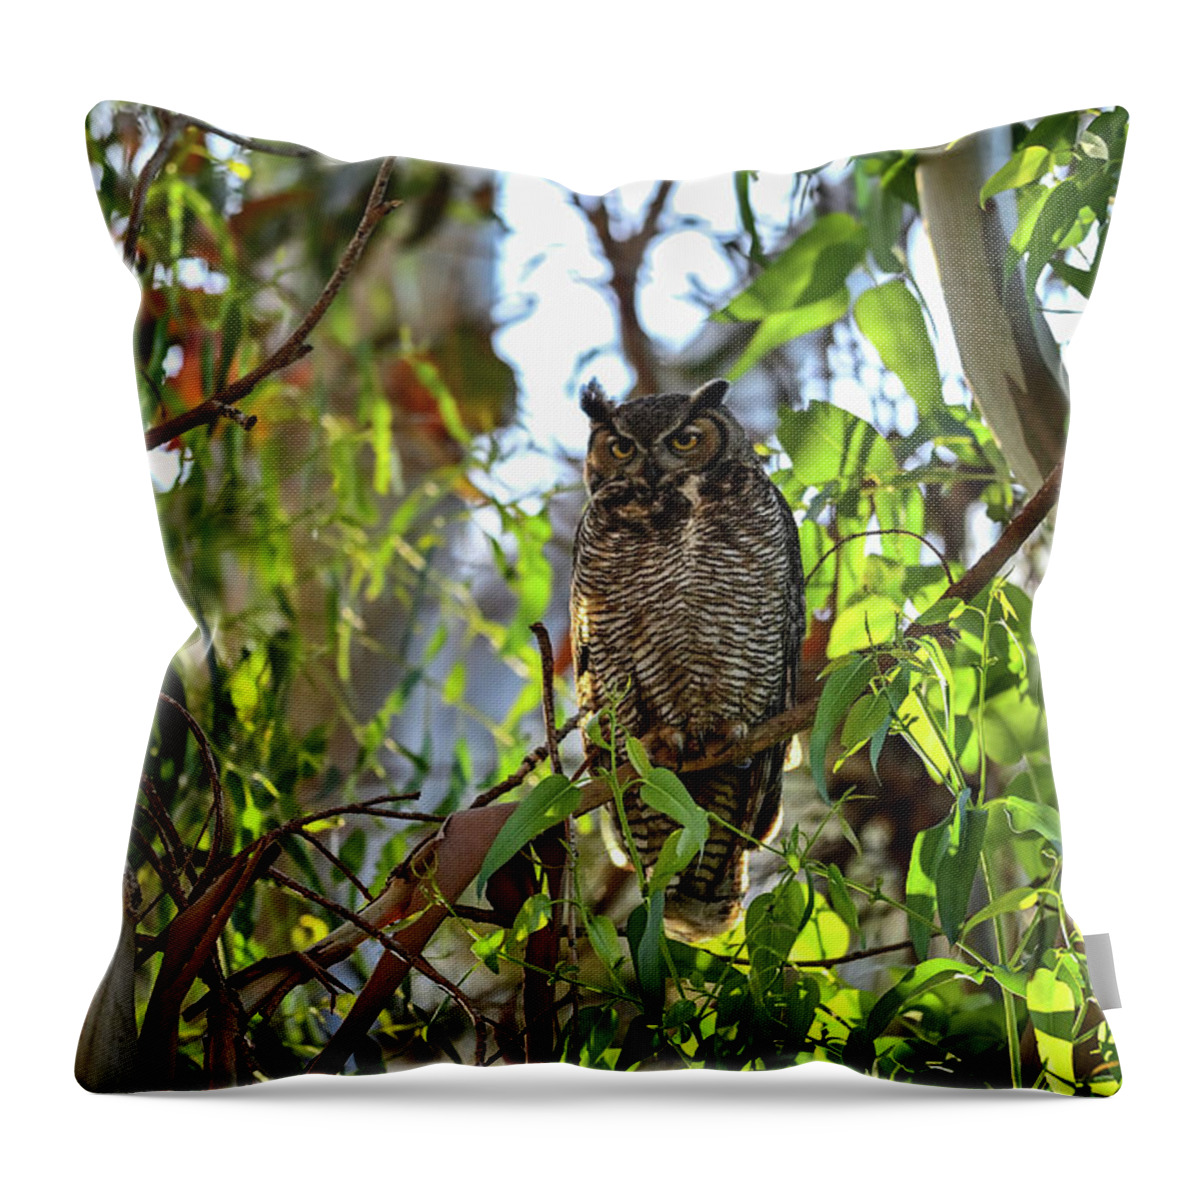 Great-horned Owl Throw Pillow featuring the photograph Great-horned Owl - Bubo virginianus by Amazing Action Photo Video